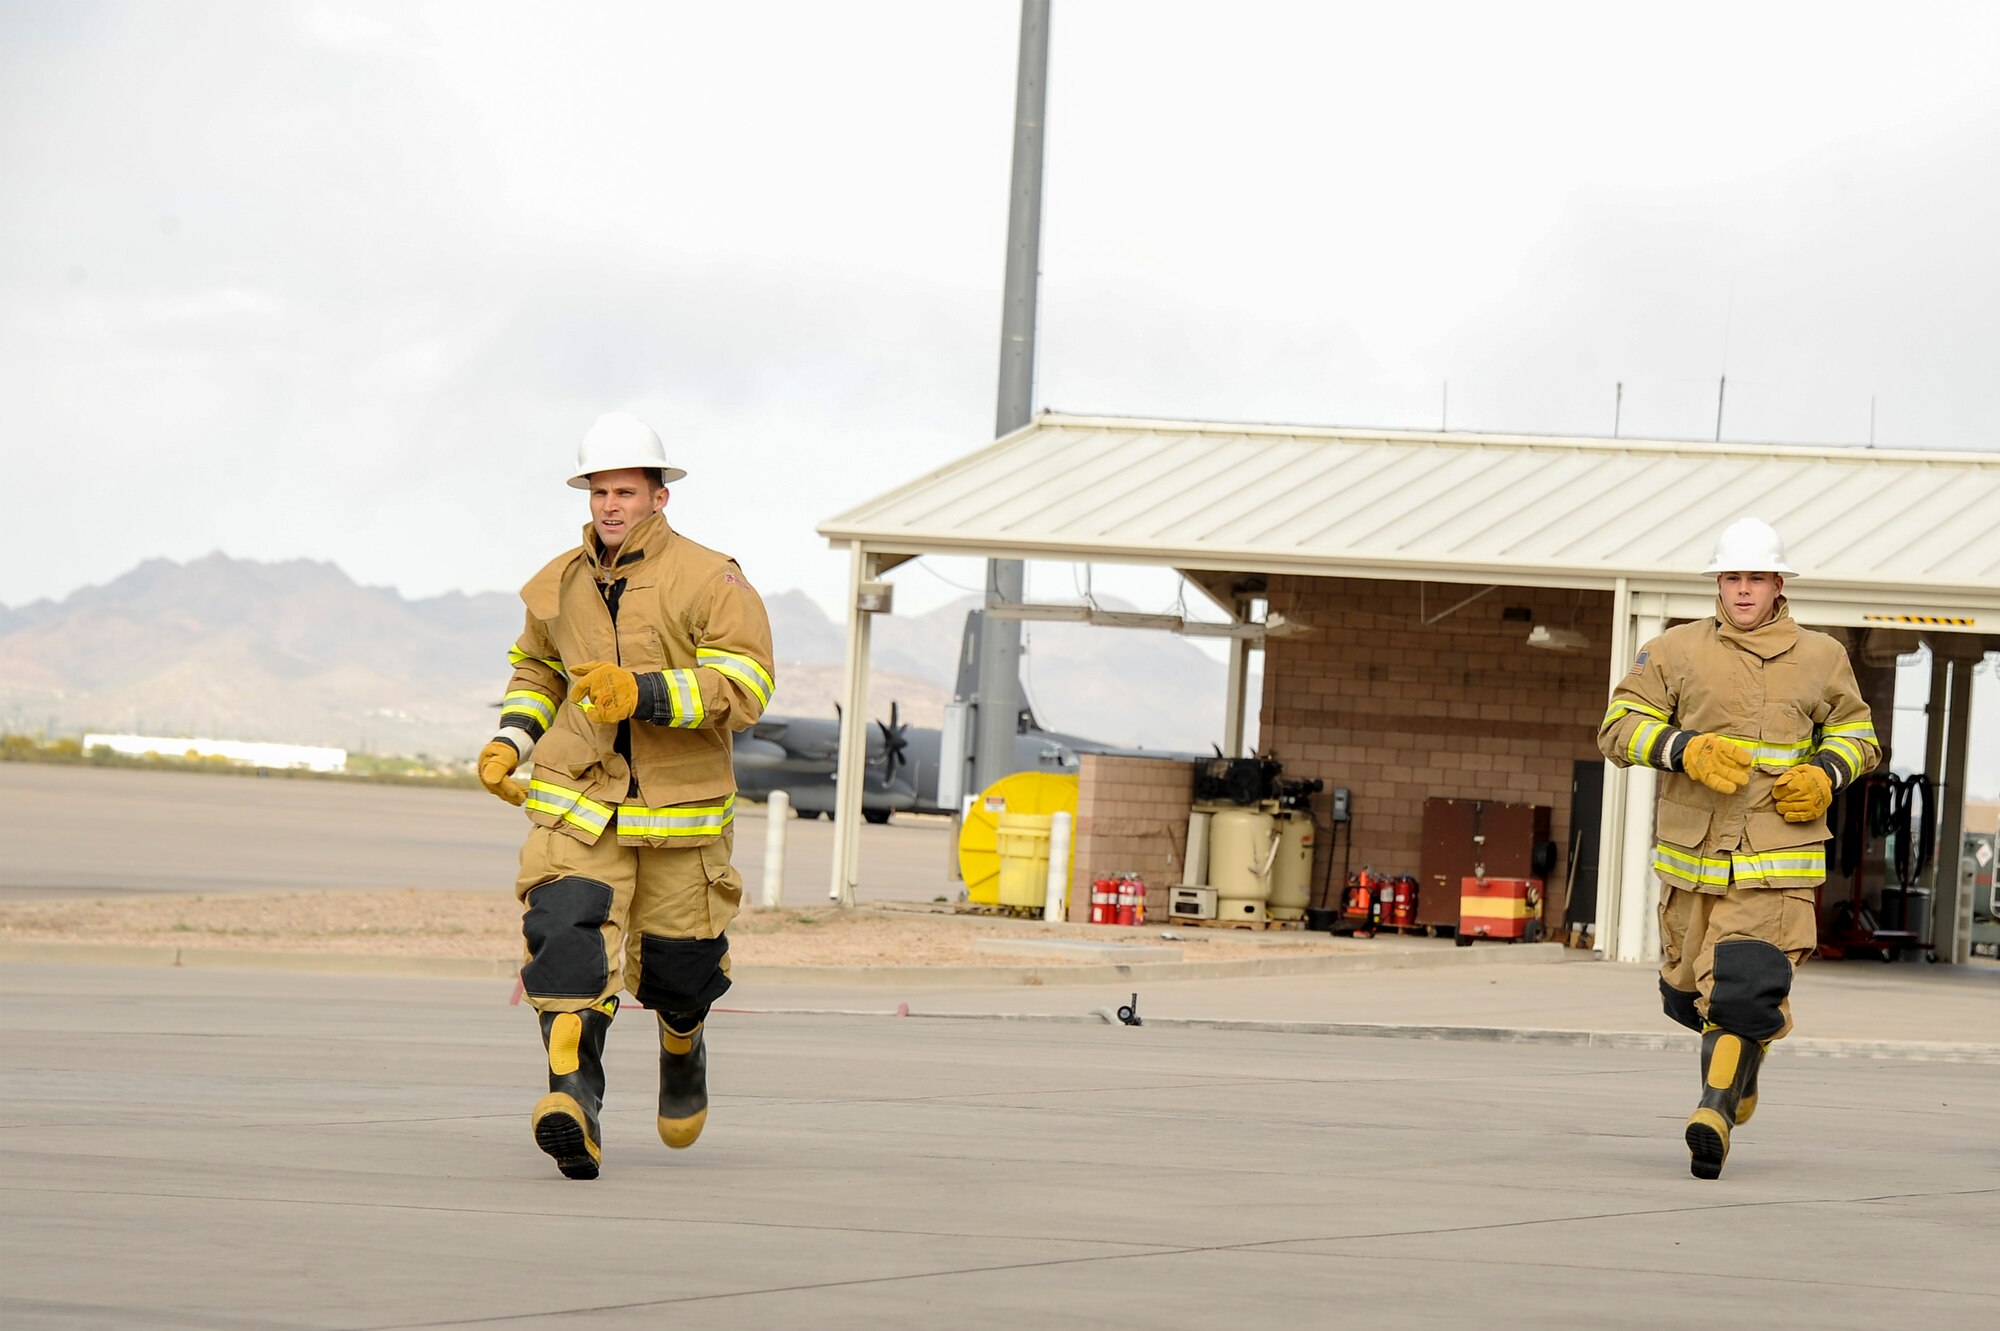 U.S. Air Force 2nd Lt. Justin Trampota, 355th Logistics Readiness Squadron officer in charge of vehicle management, and Airman 1st Class Dylan Nigren, 355th LRS fire truck and refueling journeyman, run towards the next station during the Comprehensive Airman Fitness Month Fire Department Fitness Challenge at Davis-Monthan Air Force Base, Ariz., March 31, 2016.  The event was hosted by the 355th Civil Engineer Squadron’s explosive ordnance disposal and fire emergency service flights in coordination with the Community Support Center with the objectives of embracing team building, showing the links between different CAF pillars, and encouraging Airmen to challenge themselves. (U.S. Air Force photo by Airman 1st Class Mya M. Crosby/Released)